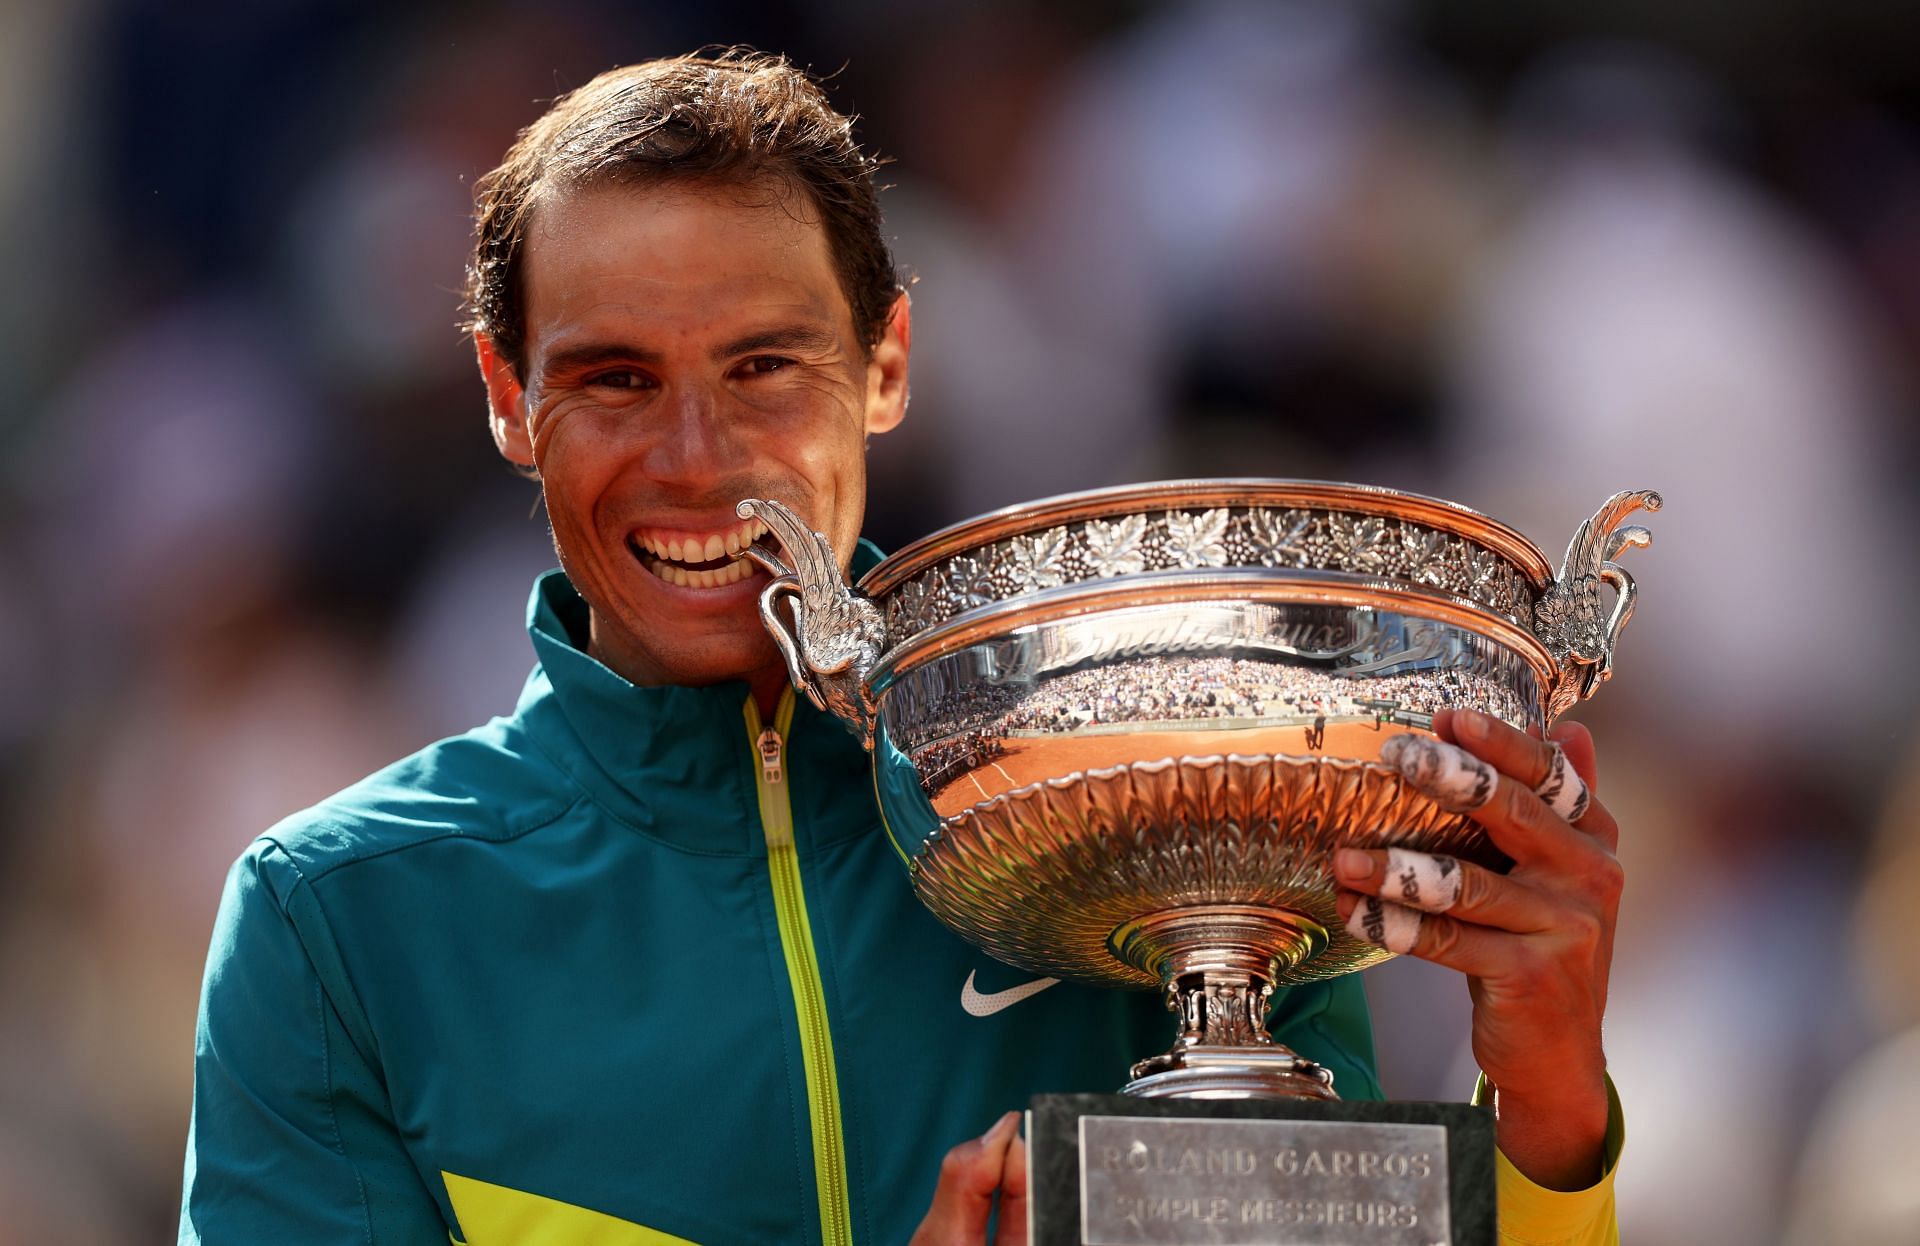 The Spanish great will bid for a record-exending 15th title at the French Open.